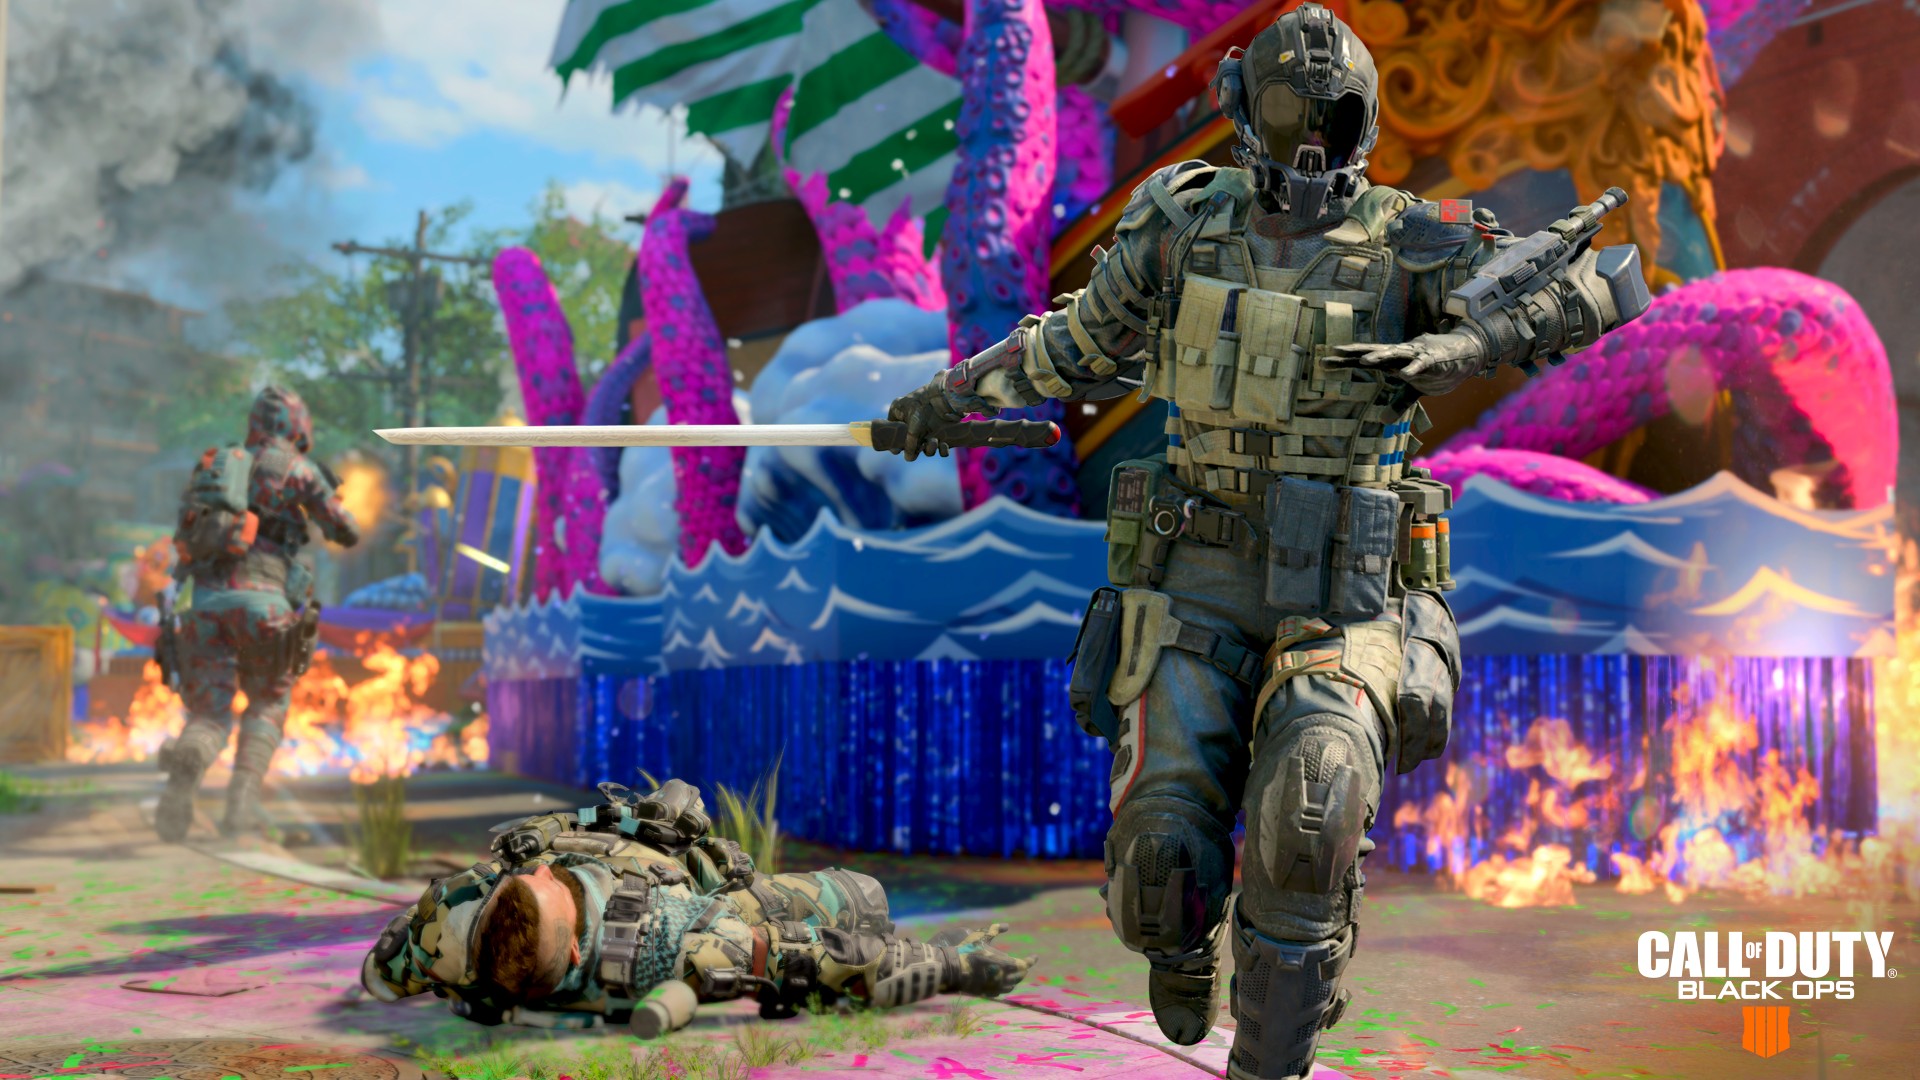 xbox store call of duty black ops 4